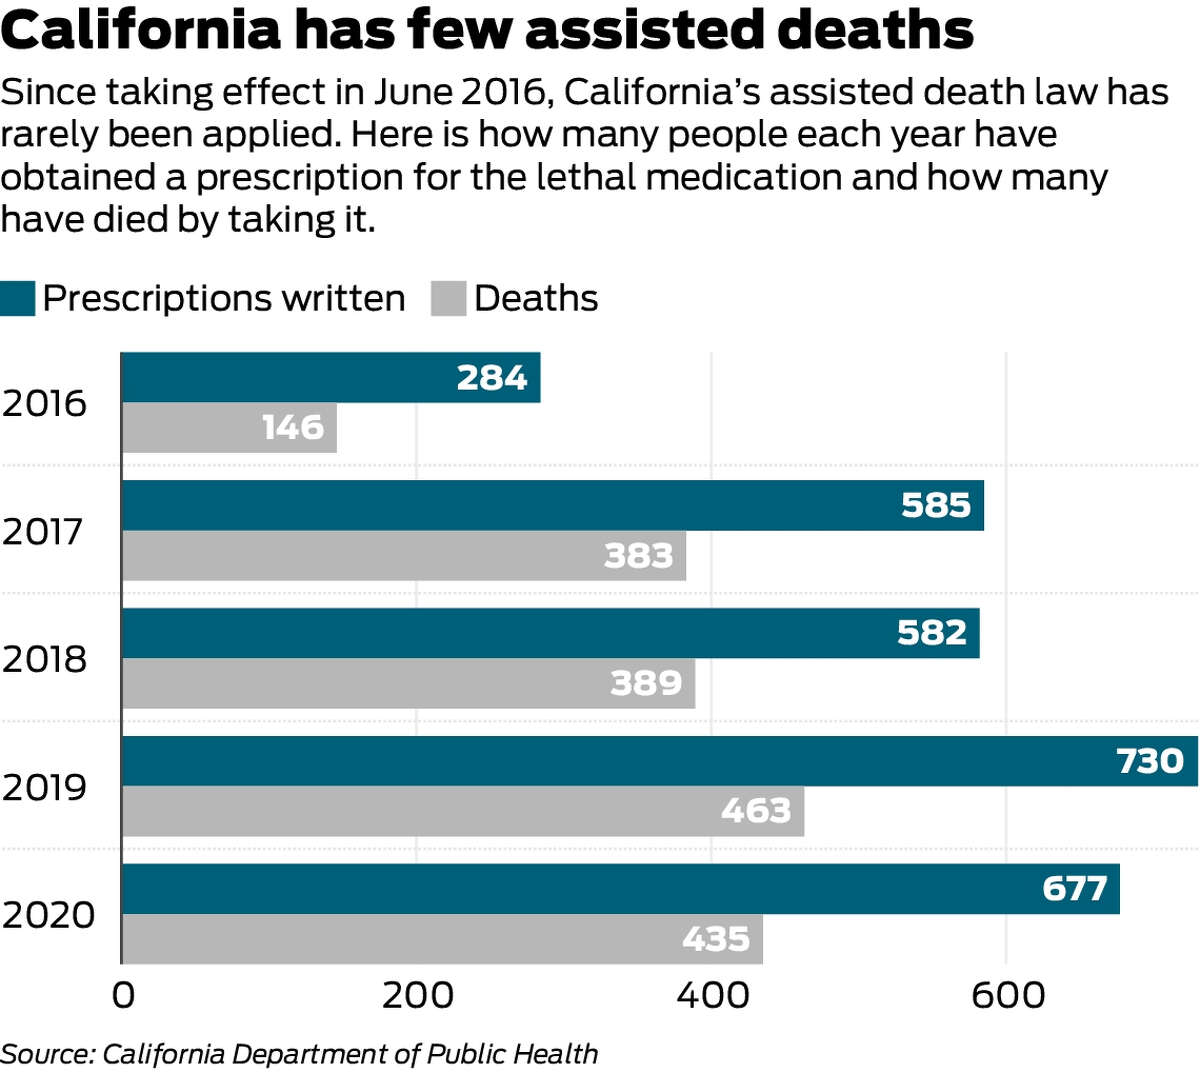 Assisted death is legal in California, but some patients die waiting. A